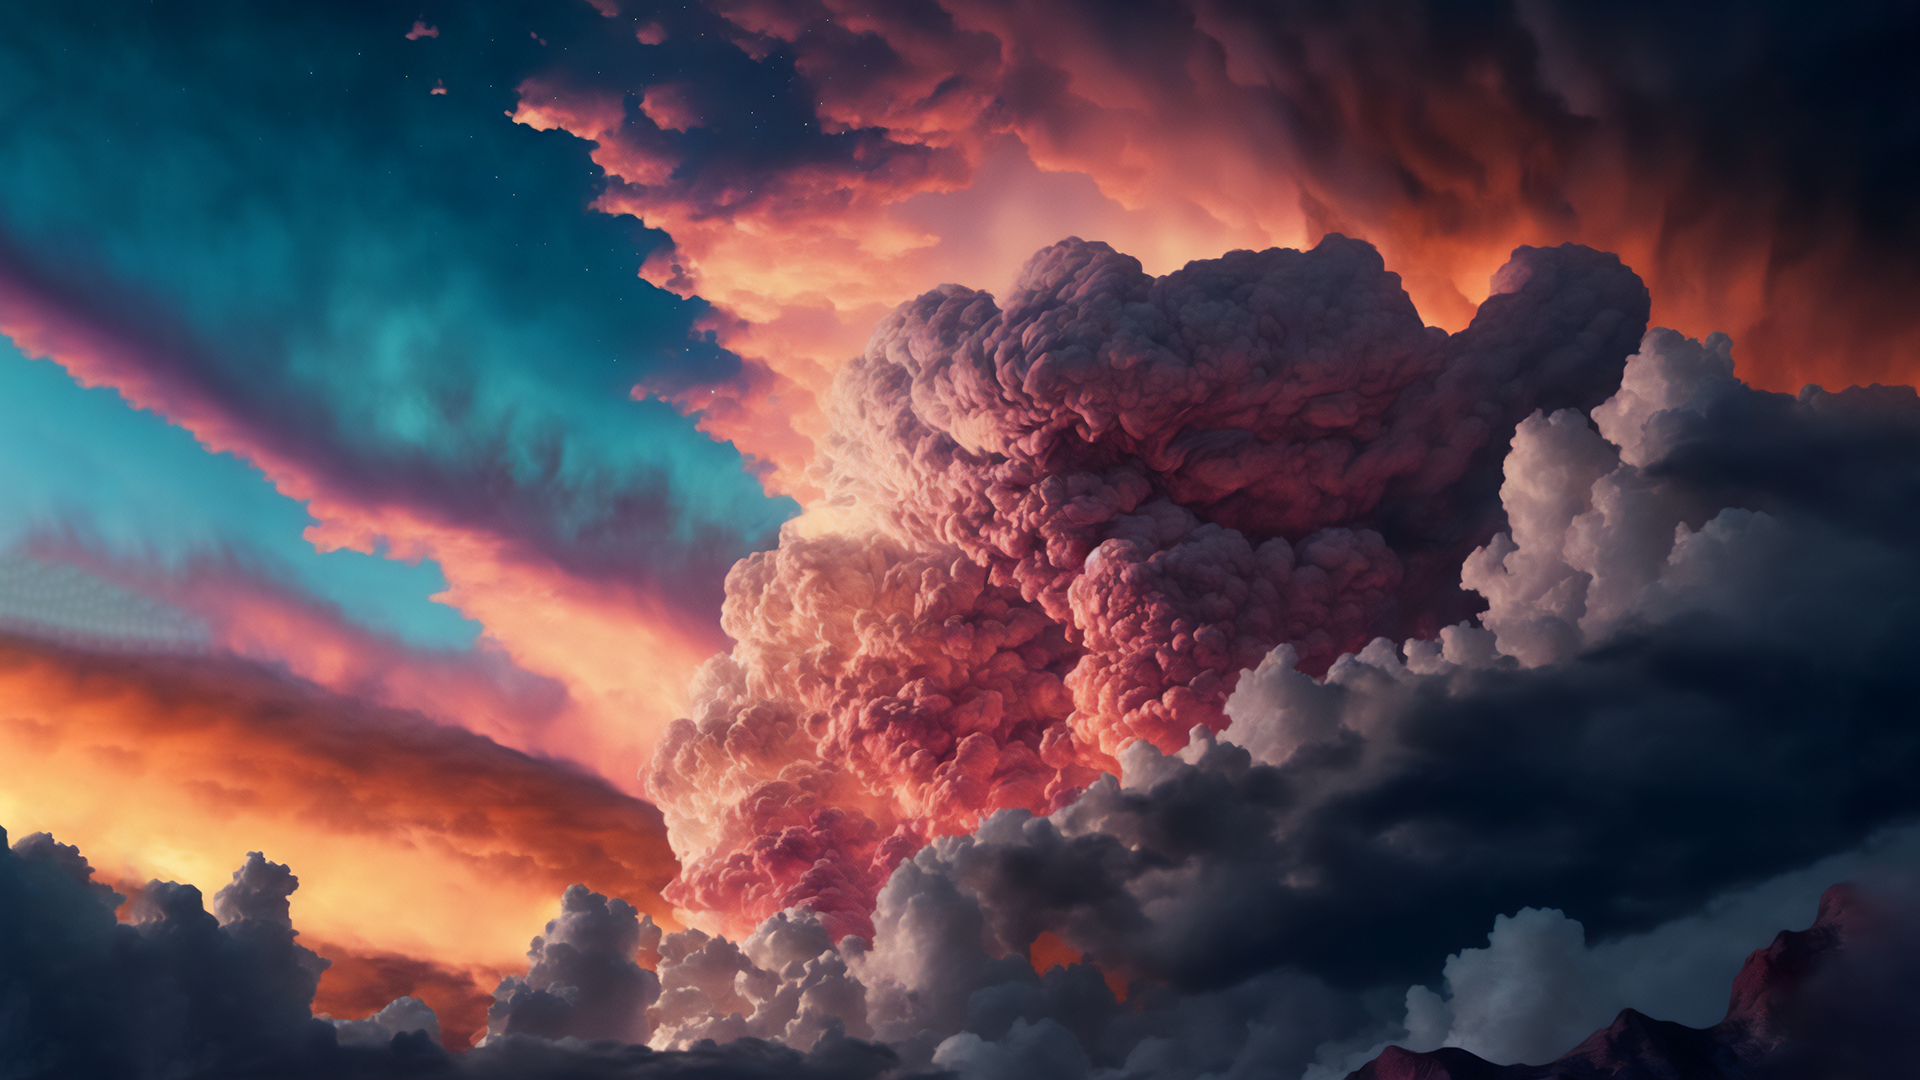 Storm Clouds Sunset Glow 1920x1080